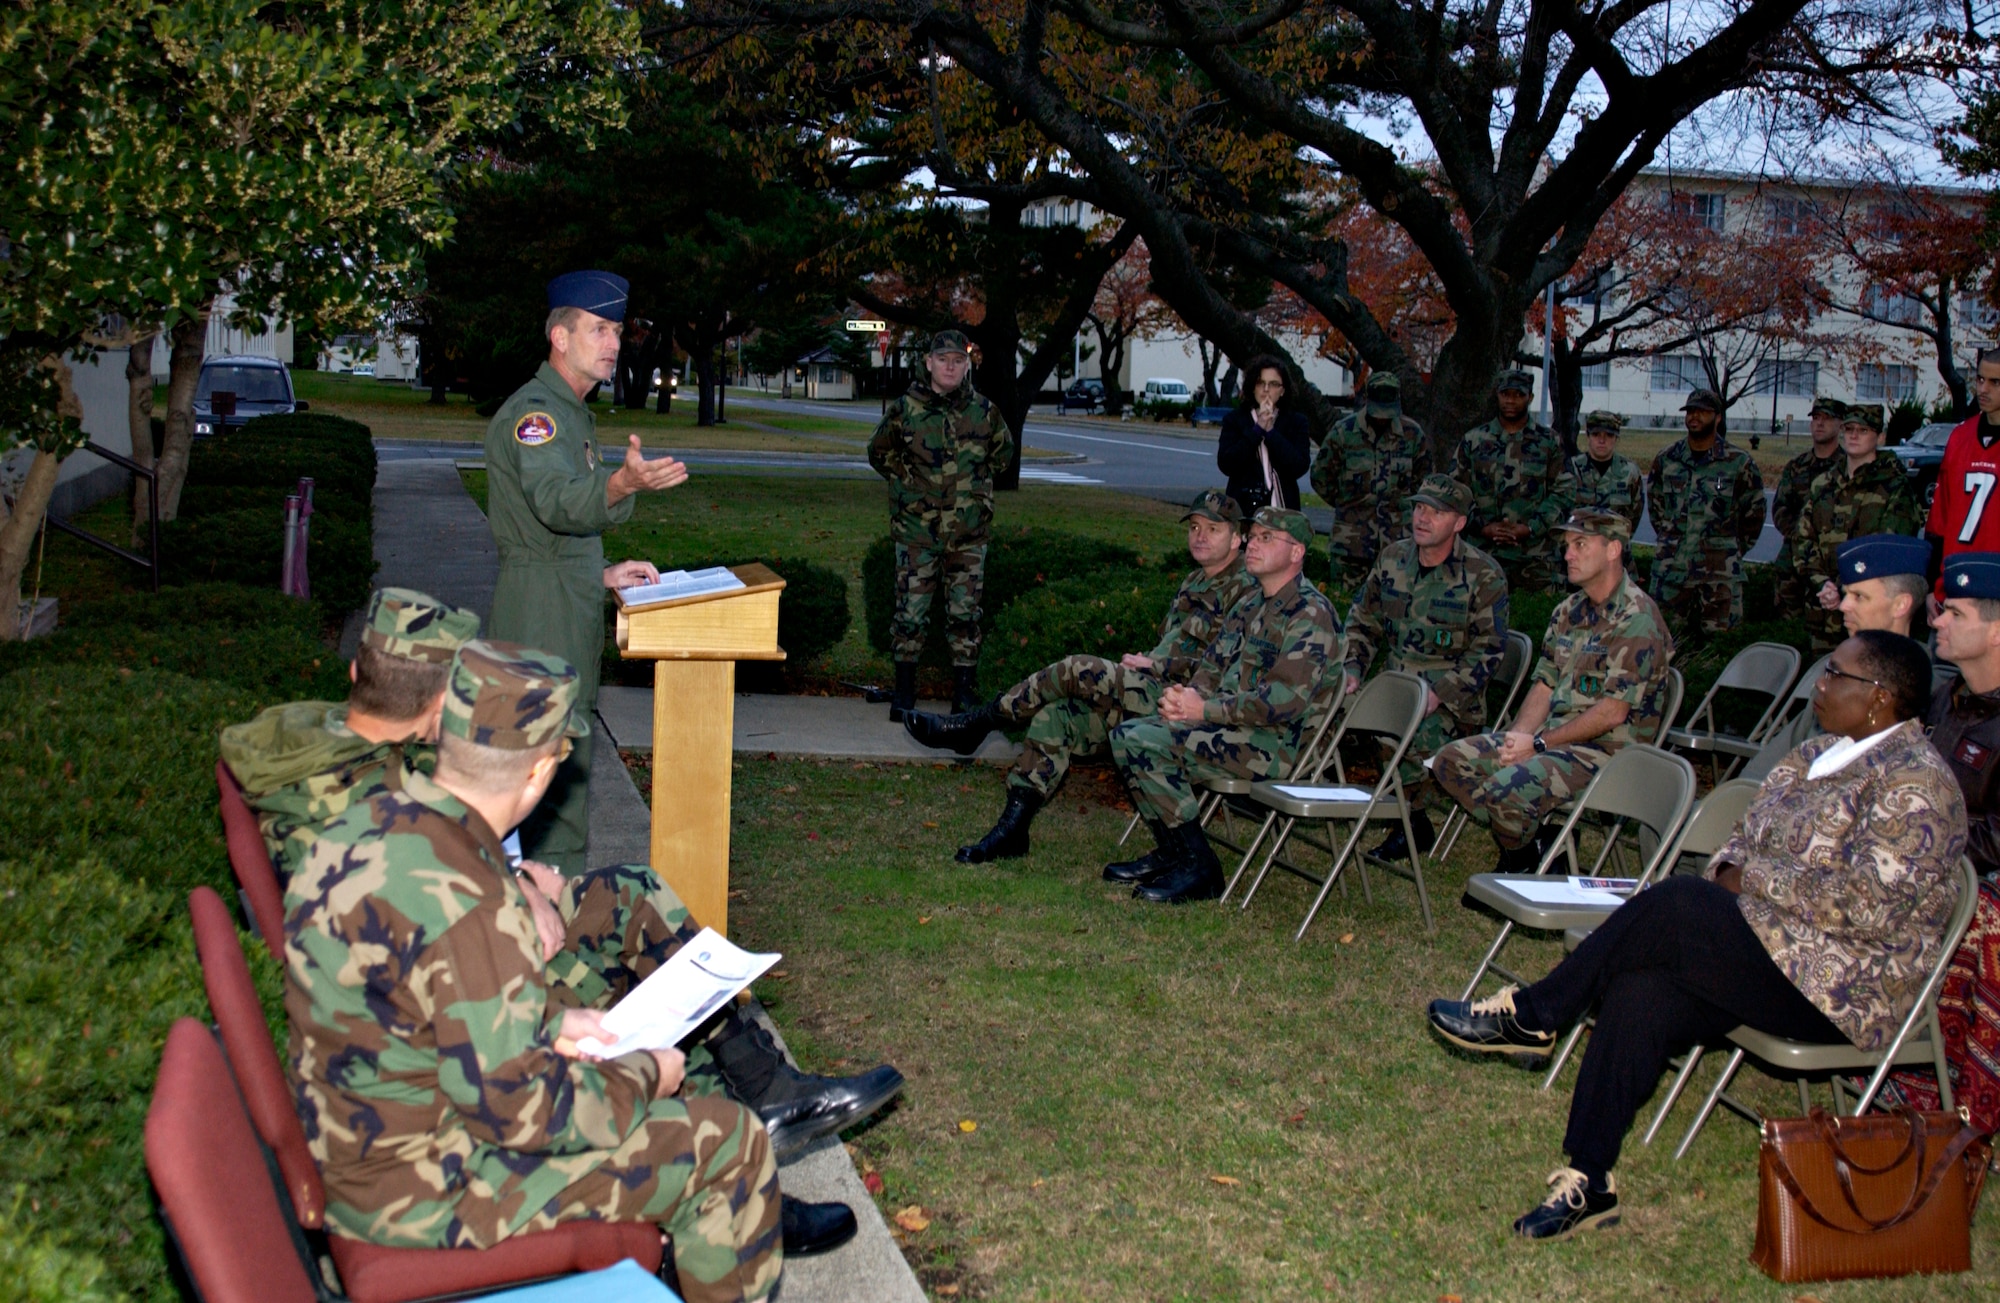 MISAWA AIR BASE, Japan -- Col. Terrence O'Shaughnessey, 35th Fighter Wing Commander, speaks to attendees at the Four Chaplains Center ribbon cutting Nov. 9, 2007. The Four Chaplains Center is a place for single military members to go and socialize in an uplifting environment. (US Air Force photo by Airman 1st Class Eric Harris)